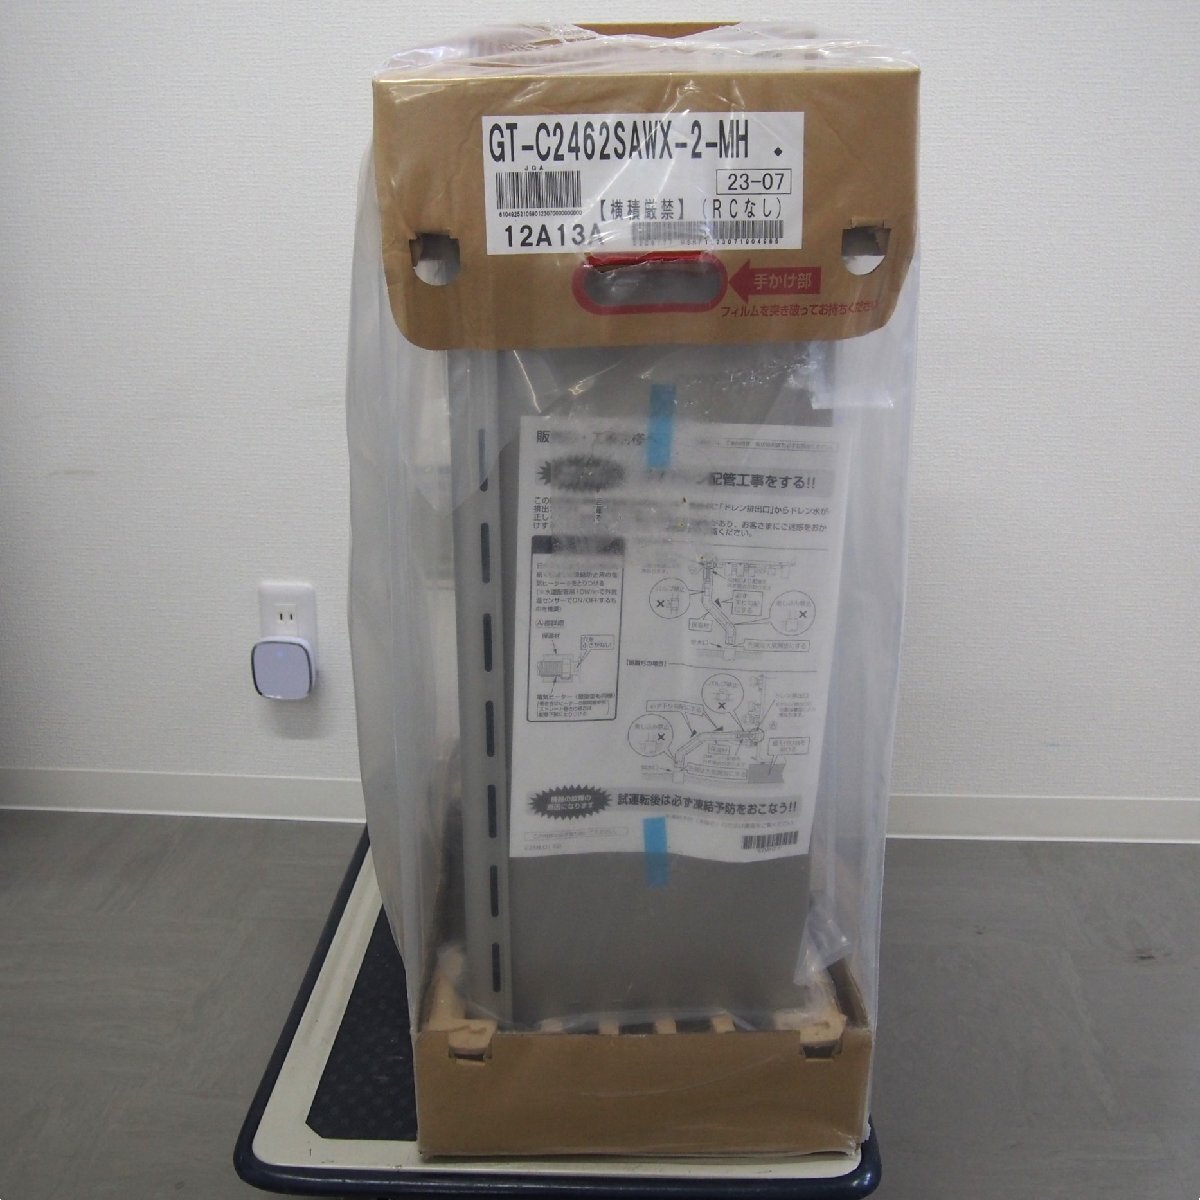 [9356-014S]no-litsu gas bath water heater GT-C2462SAWX-2 RC-B001 multi set [ used * unused ] unopened 24 number remote control attaching city gas 